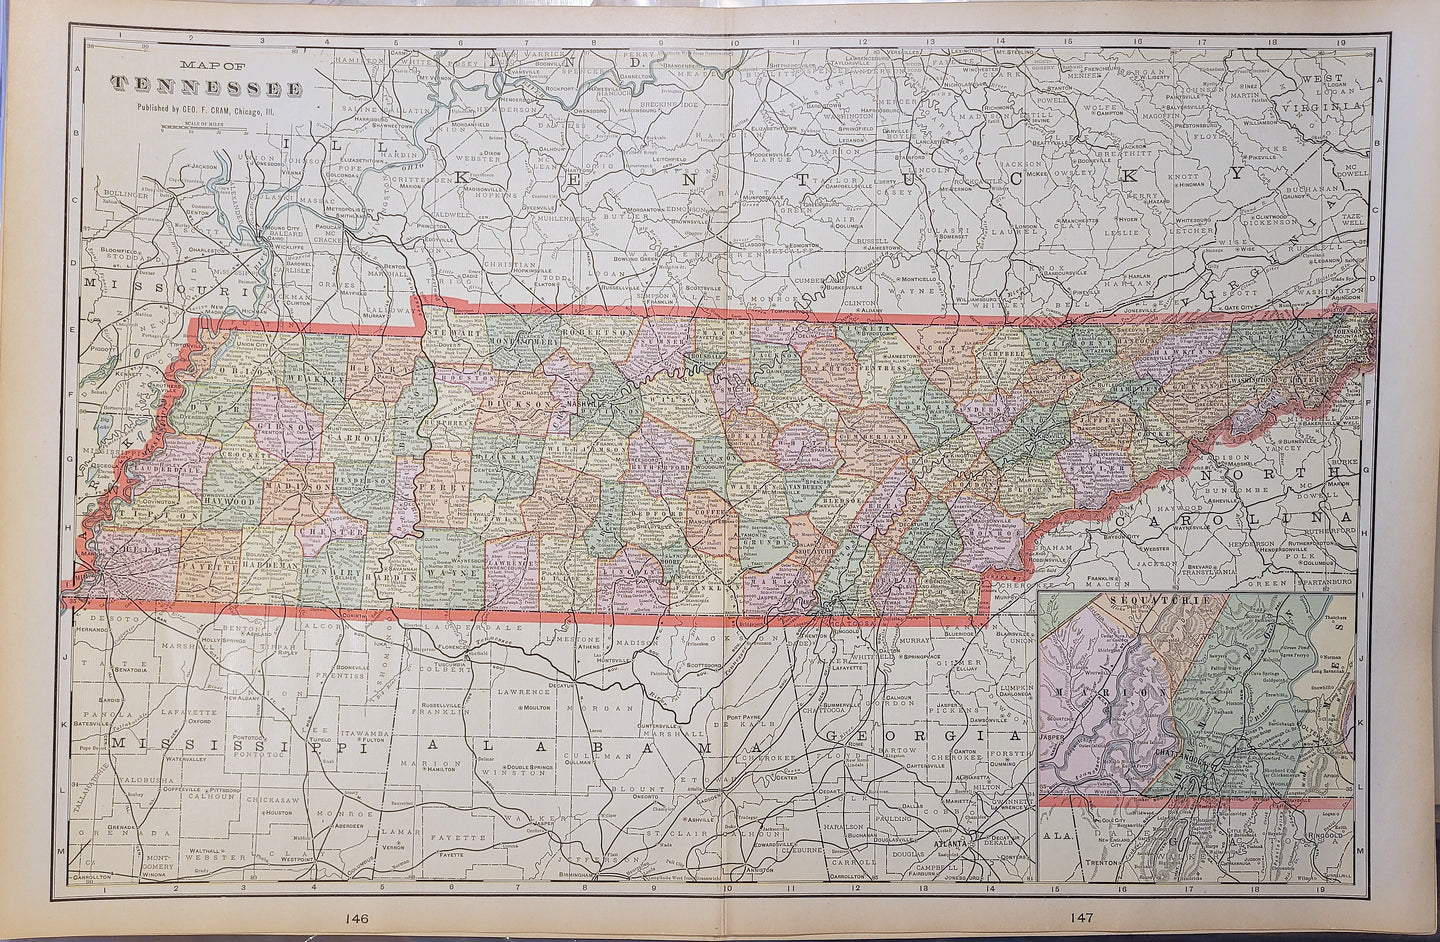 Antique-Printed-Color-Map-Tennessee-v-United-States-1905-Cram-Maps-Of-Antiquity